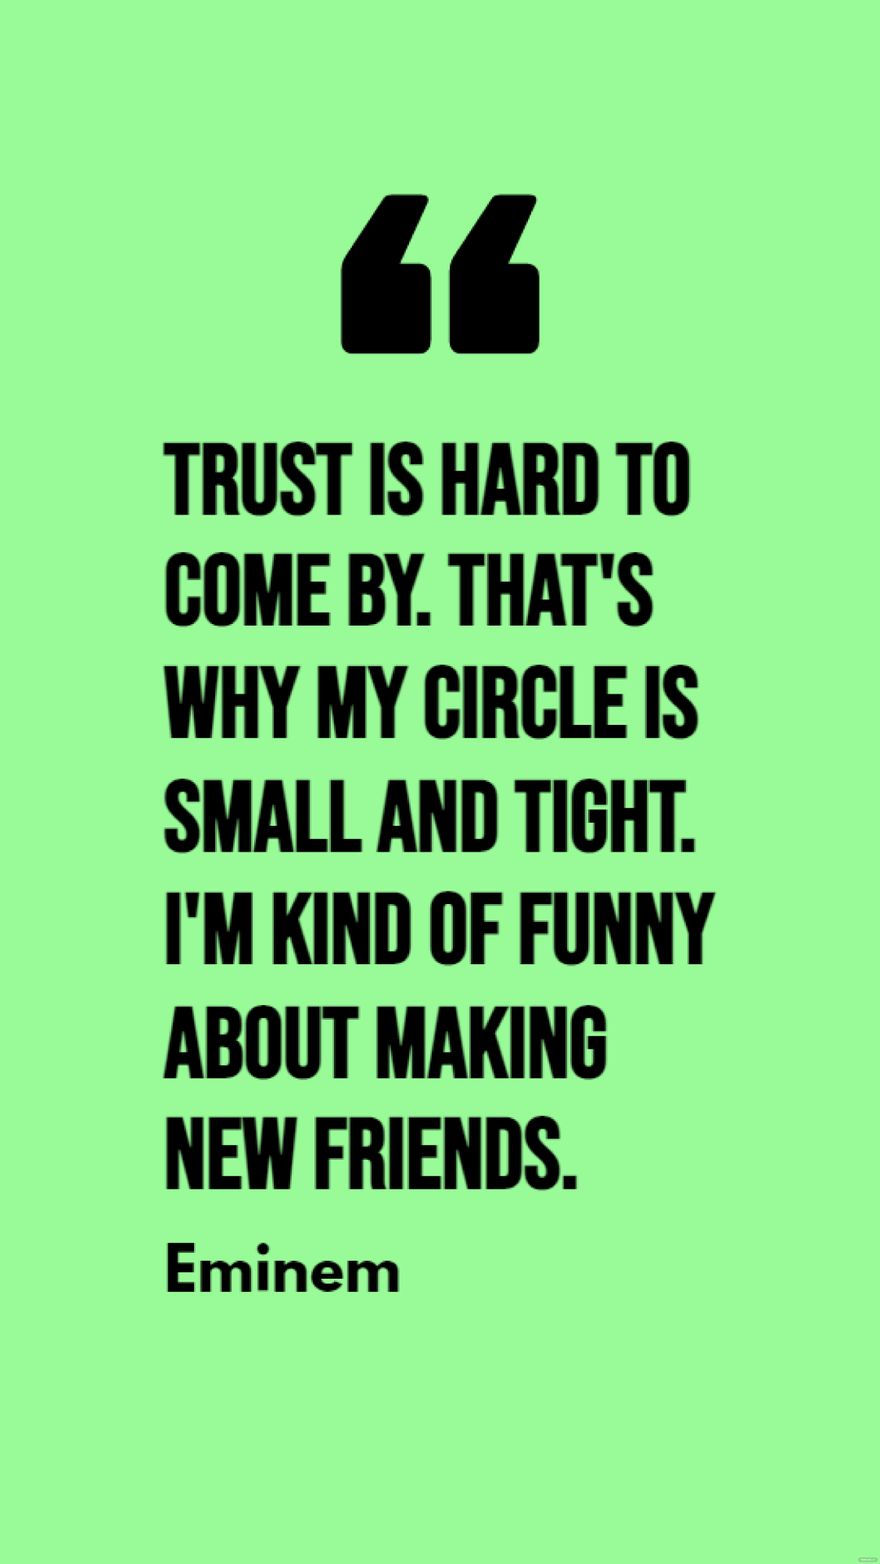 Eminem - Trust is hard to come by. That's why my circle is small and tight. I'm kind of funny about making new friends. in JPG